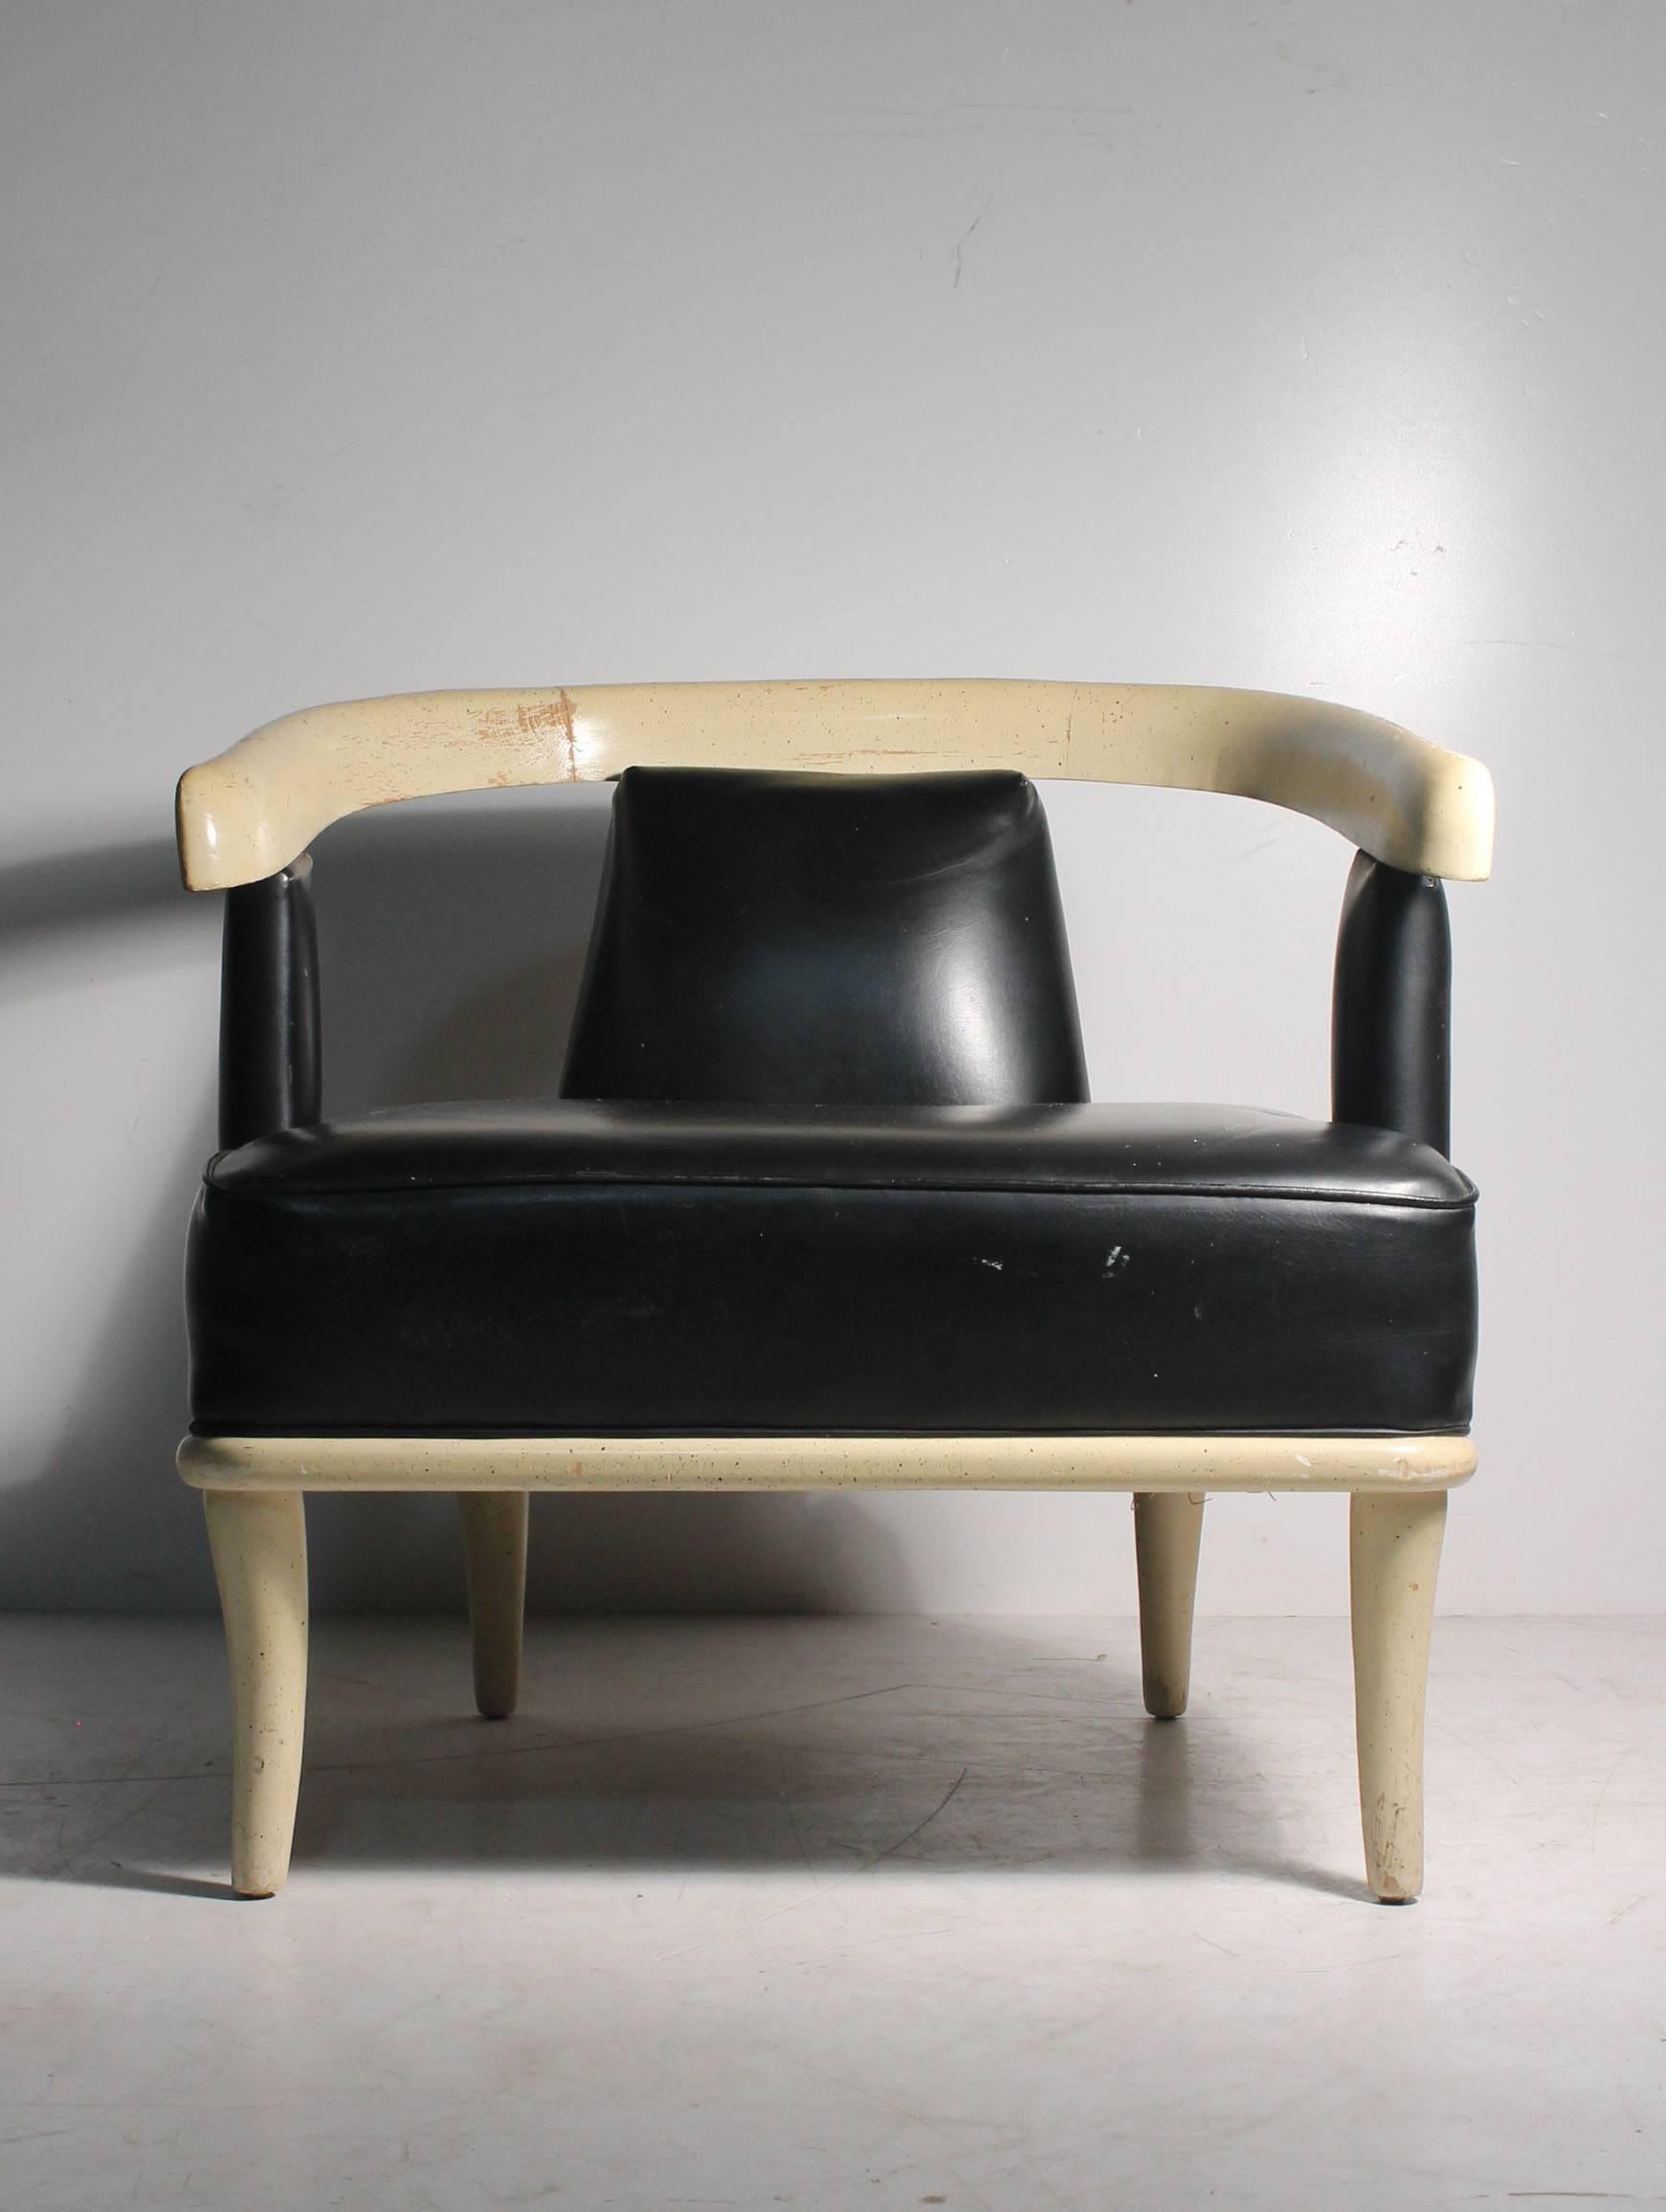 Nicely designed vintage chairs in the manner of Harvey Probber & James Mont.

Beautiful wave-like design to the armrests.

These show plenty of wear to the finish on the wood. They will need to be refinished or repainted. Black Vinyl appears to